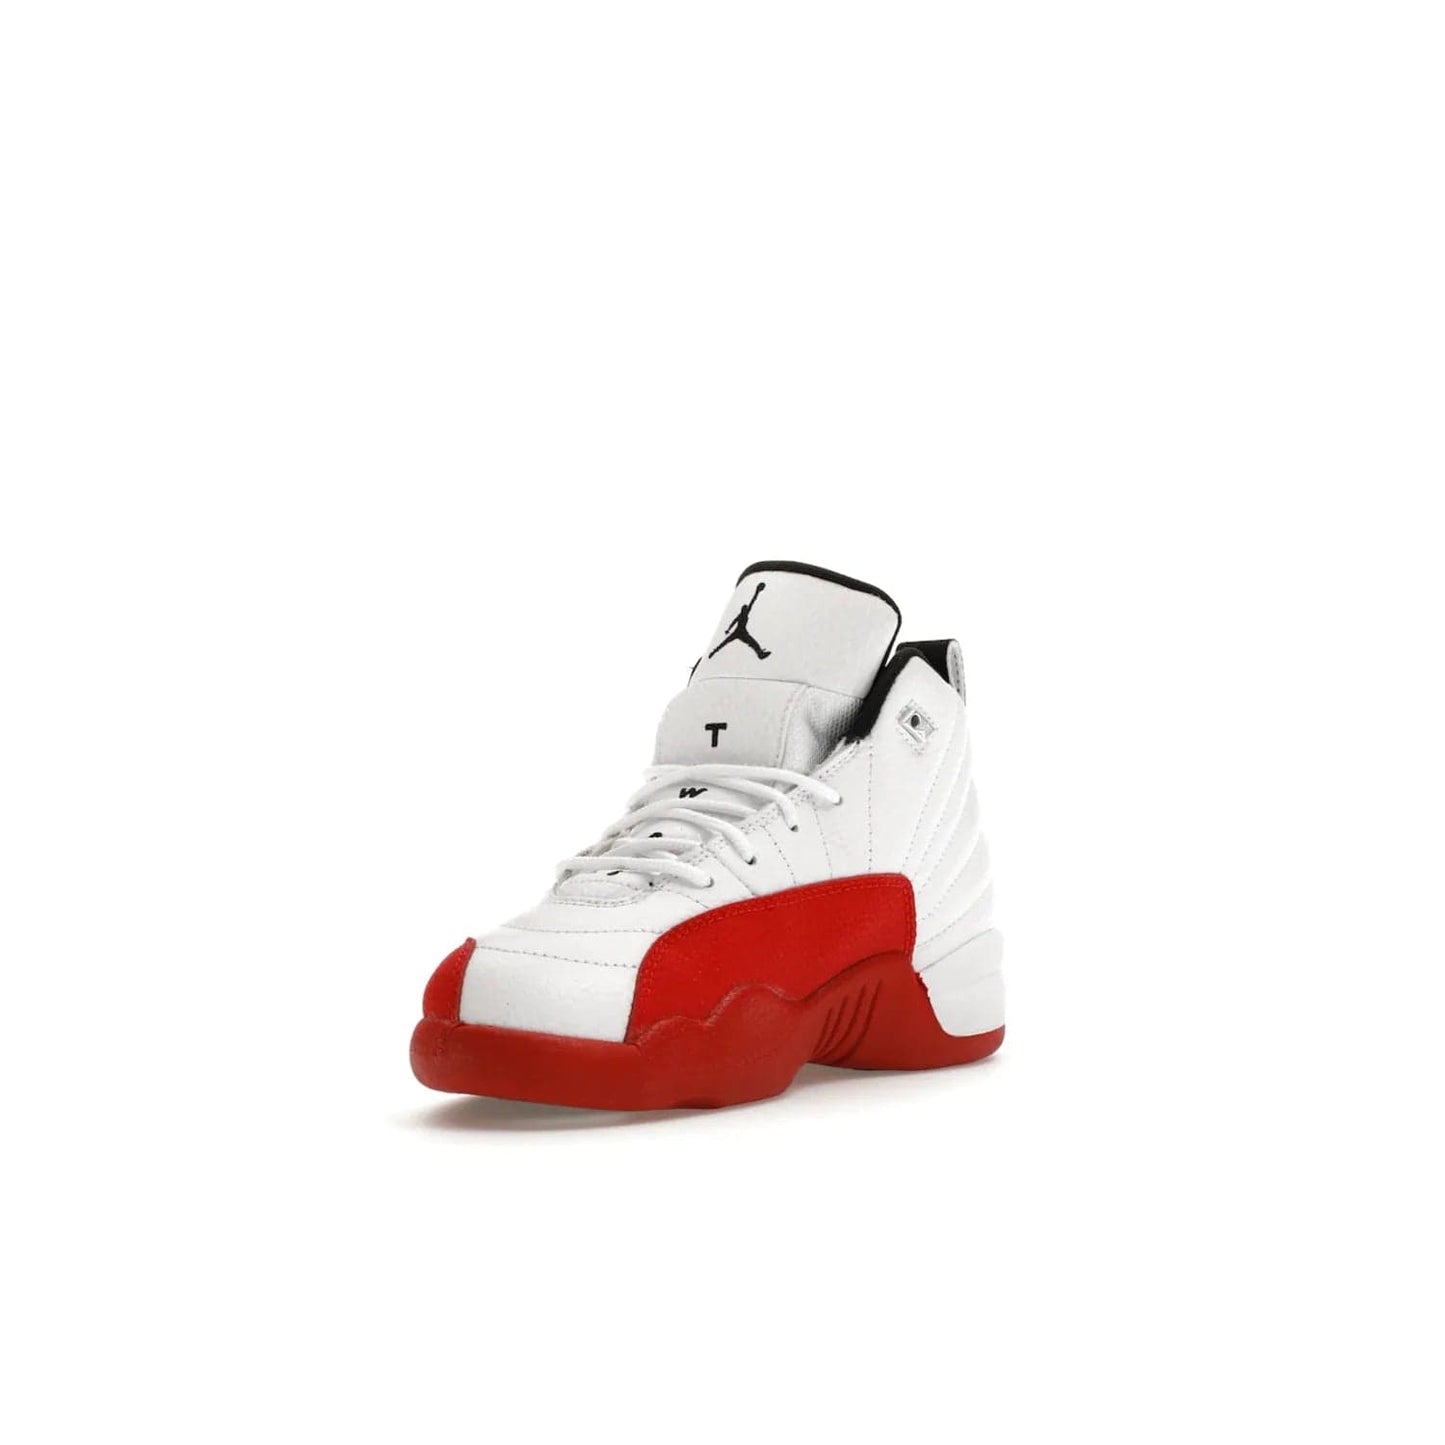 Jordan 12 Retro Cherry (2023) (PS) - Image 14 - Only at www.BallersClubKickz.com - Jordan 12 Retro Cherry dropping for toddlers in 2023! White leather upper with black overlays and red branding. Classic court style for your little one.